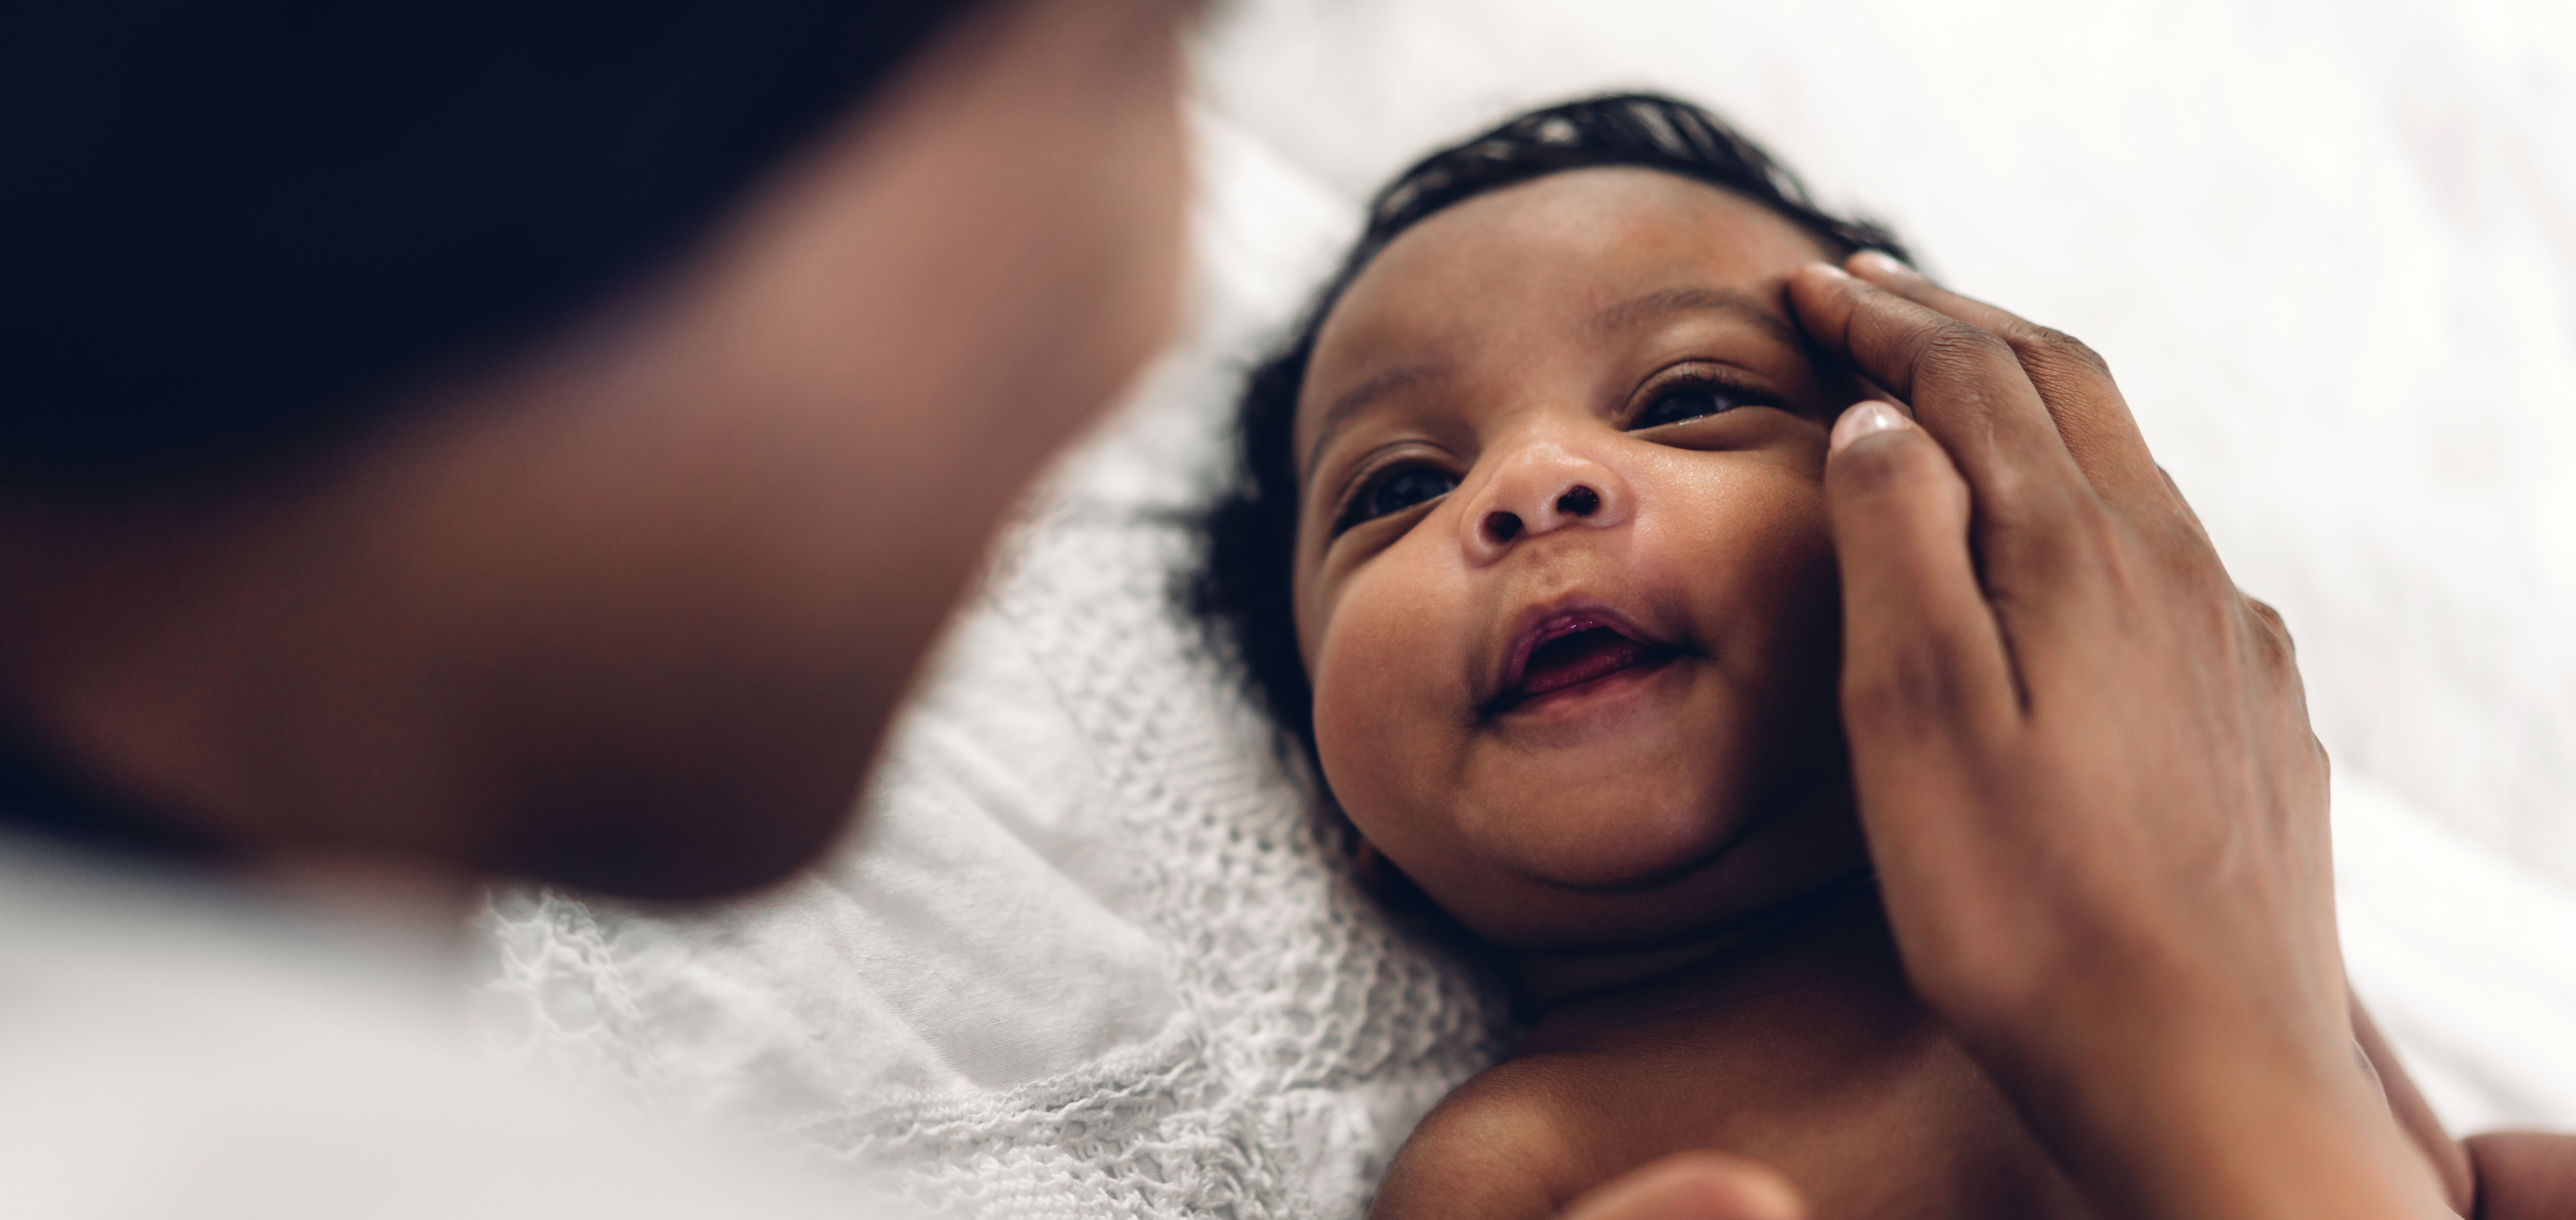 a photo of a small Black baby smiling up at his mom as she touches his face with her hand